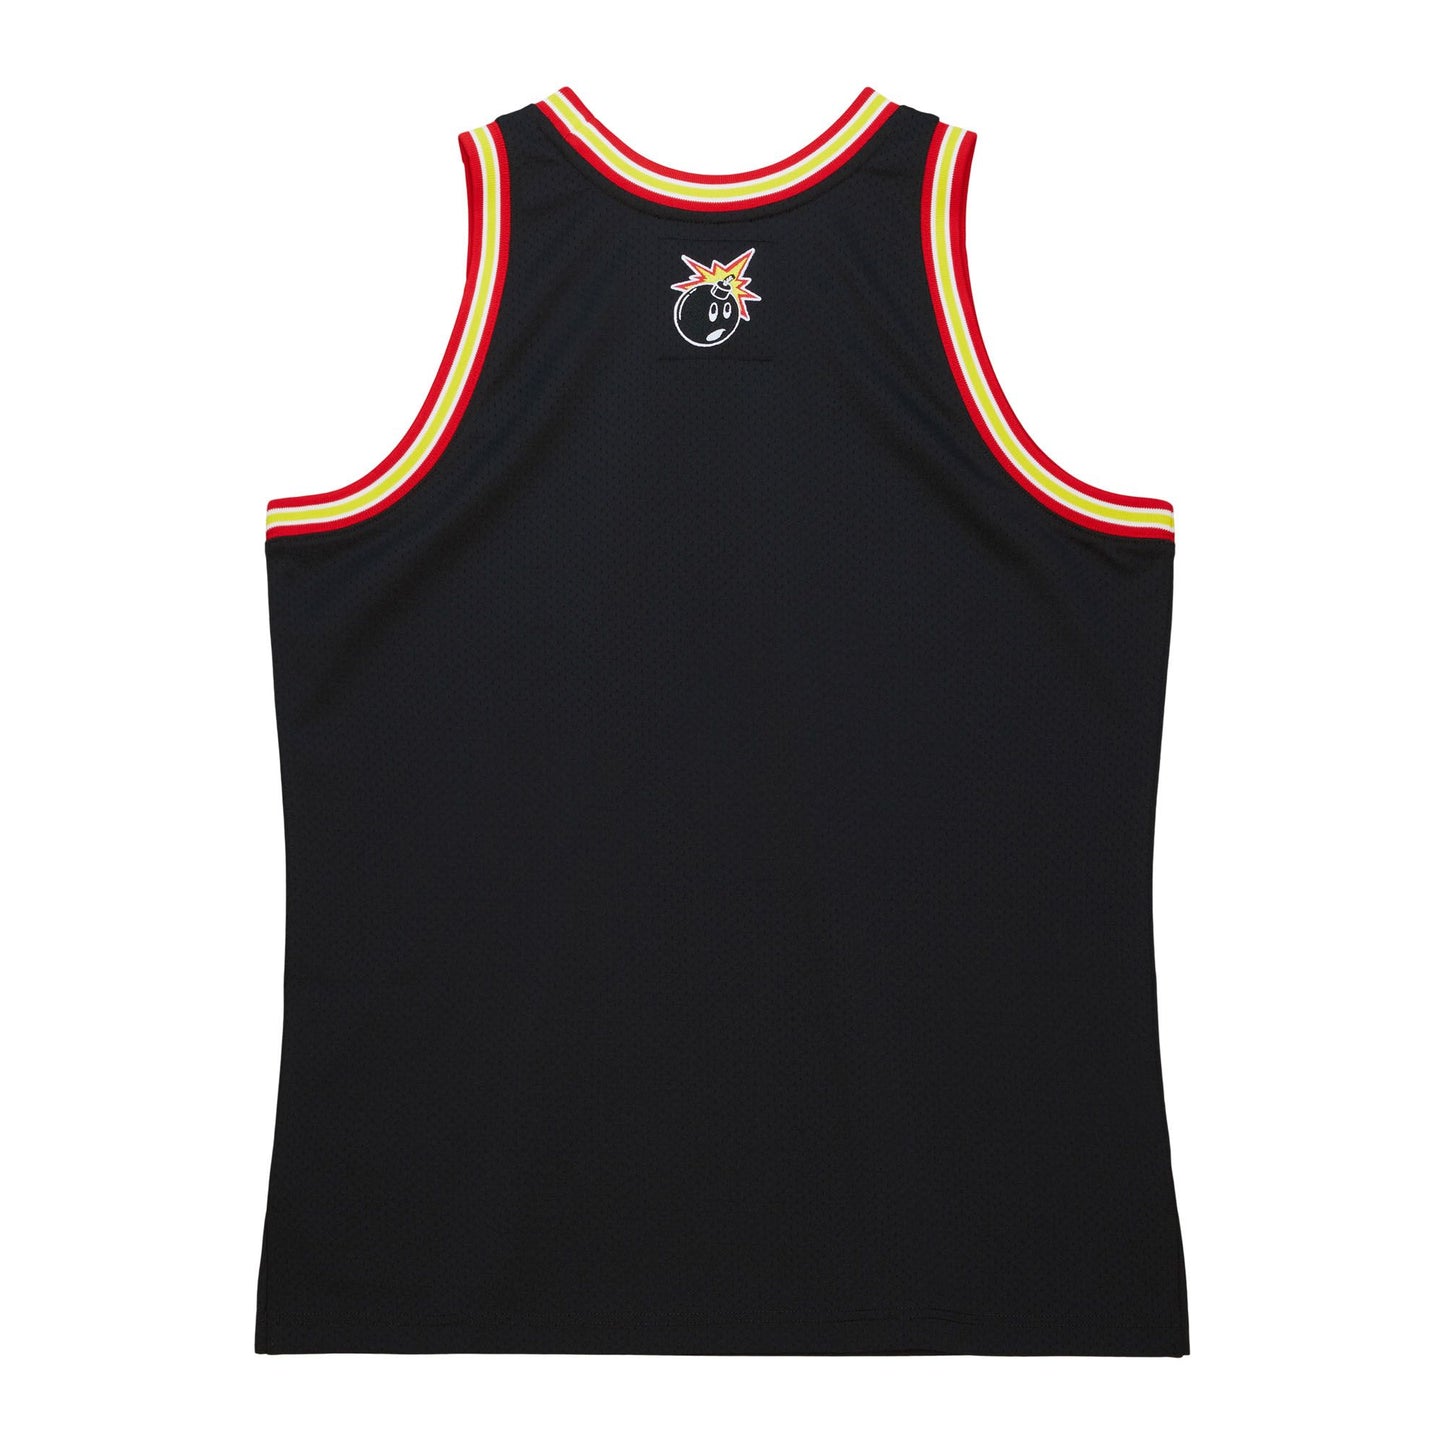 M&N x The Hundreds Jersey